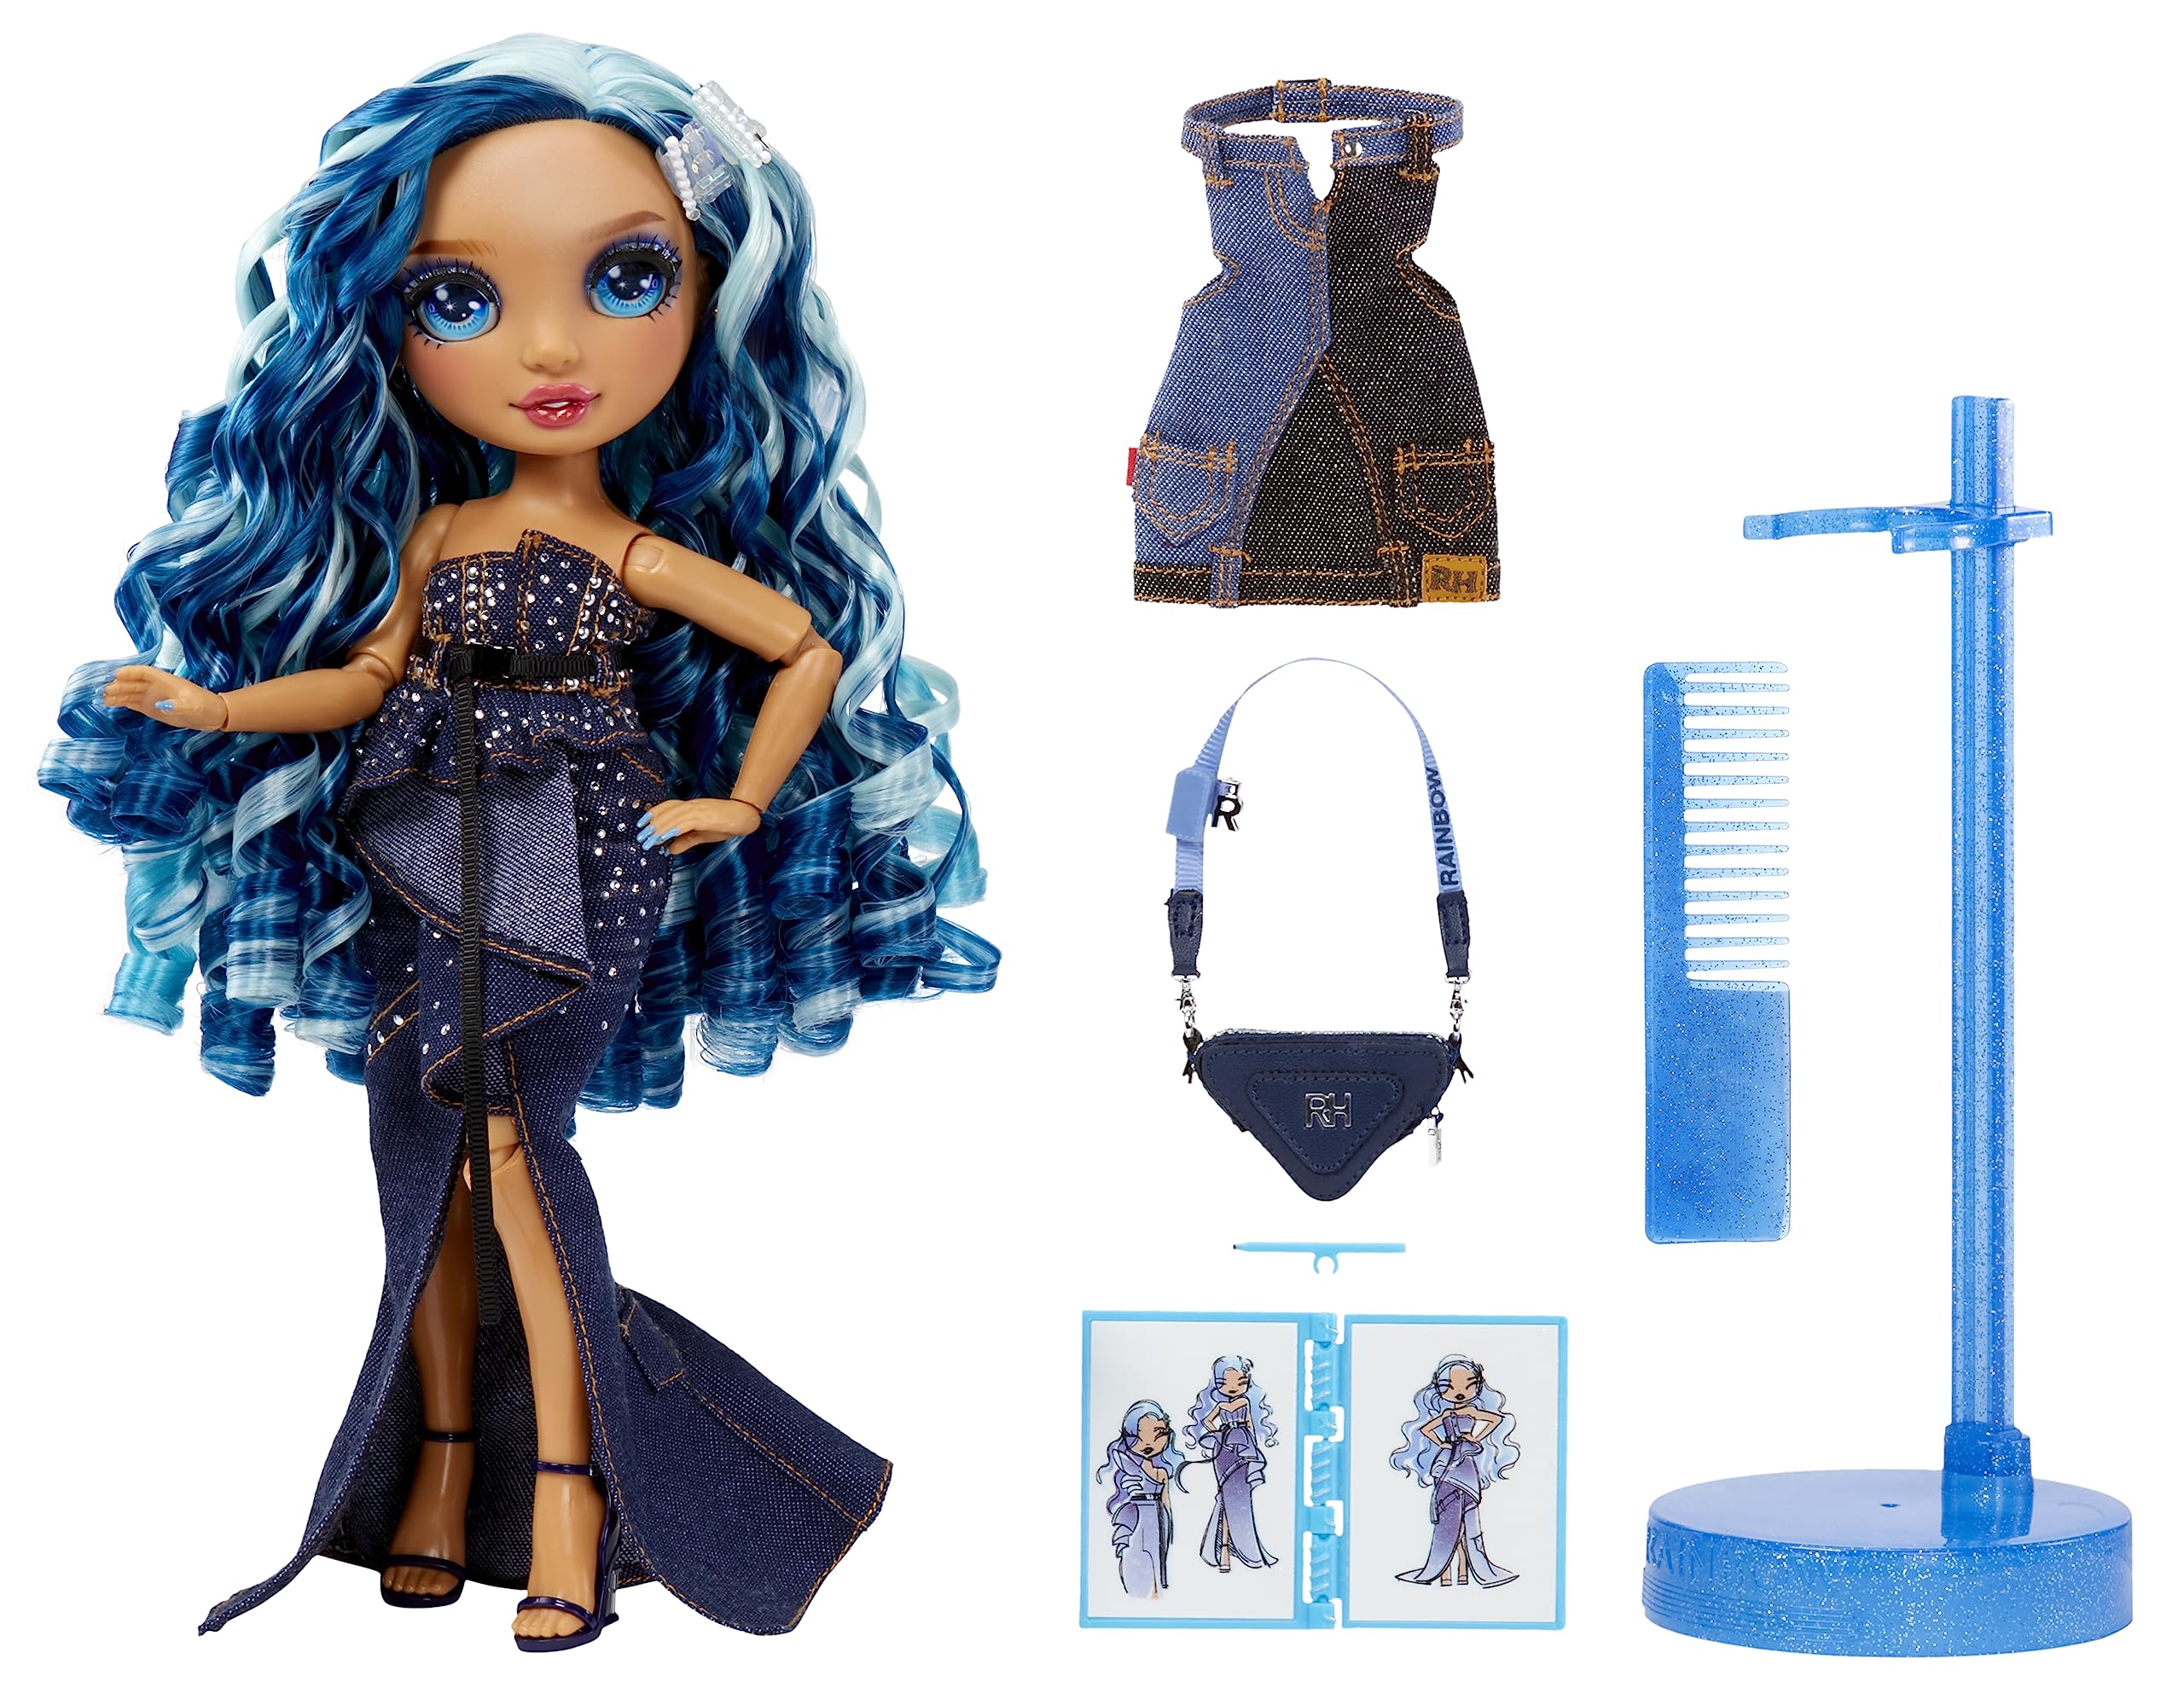 Rainbow High Fantastic Fashion Skyler Bradshaw - Blue 11” Fashion Doll and Playset with 2 Complete Doll Outfits, and Fashion Play Accessories, Great Gift for Kids 4-12 Years Old